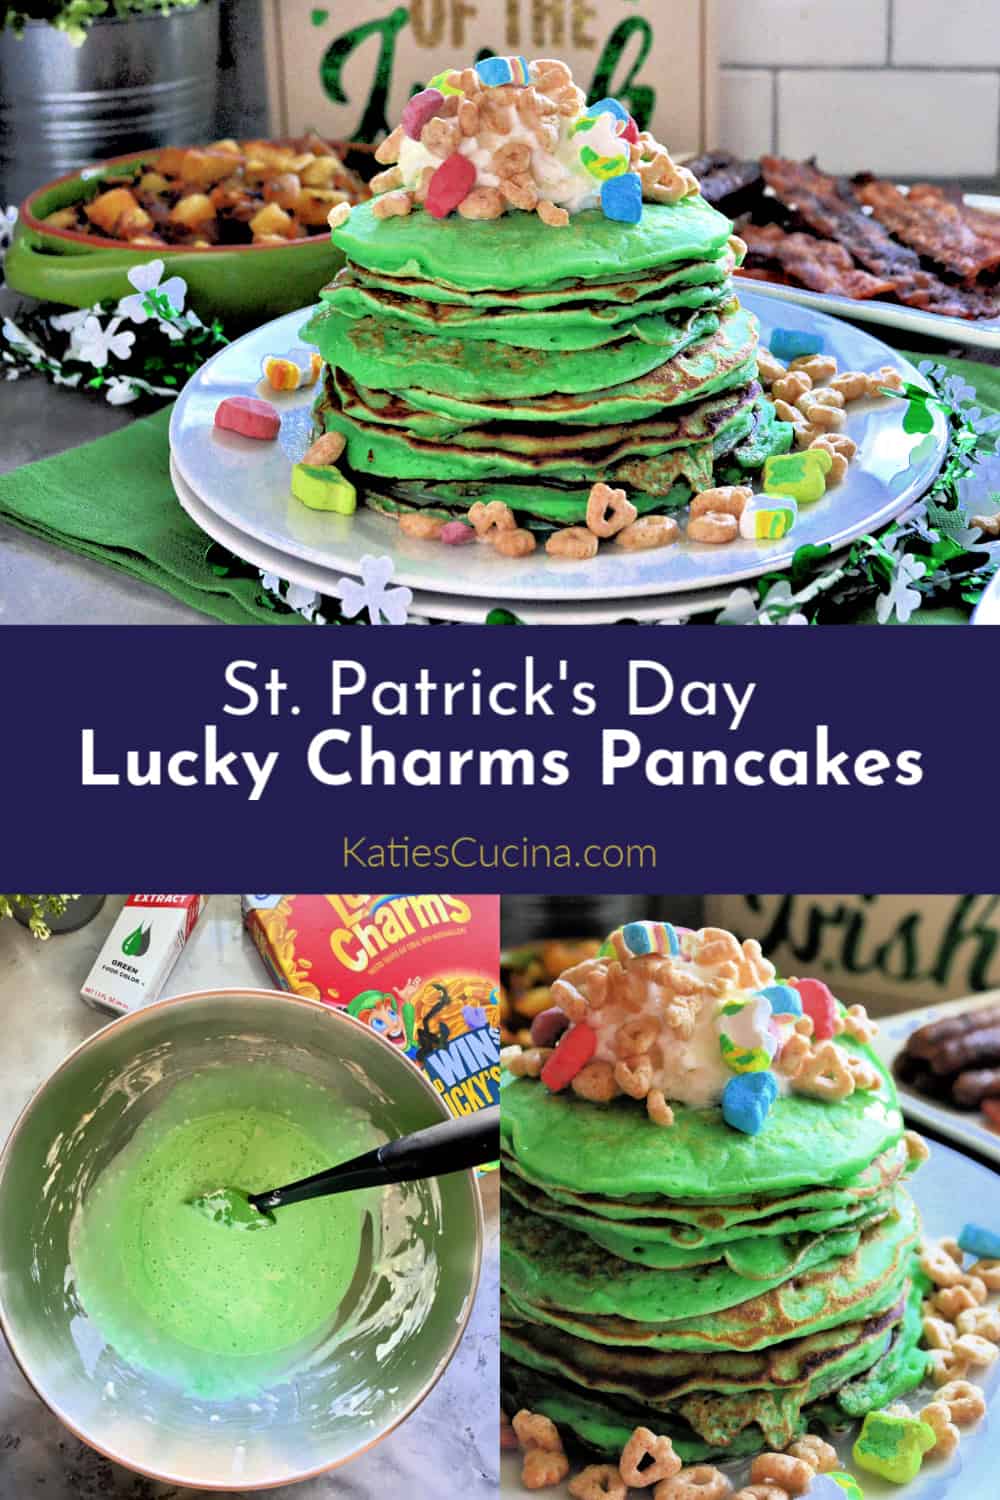 St. Patrick's Day Lucky Charms Pancakes Collage of 3 photos with text